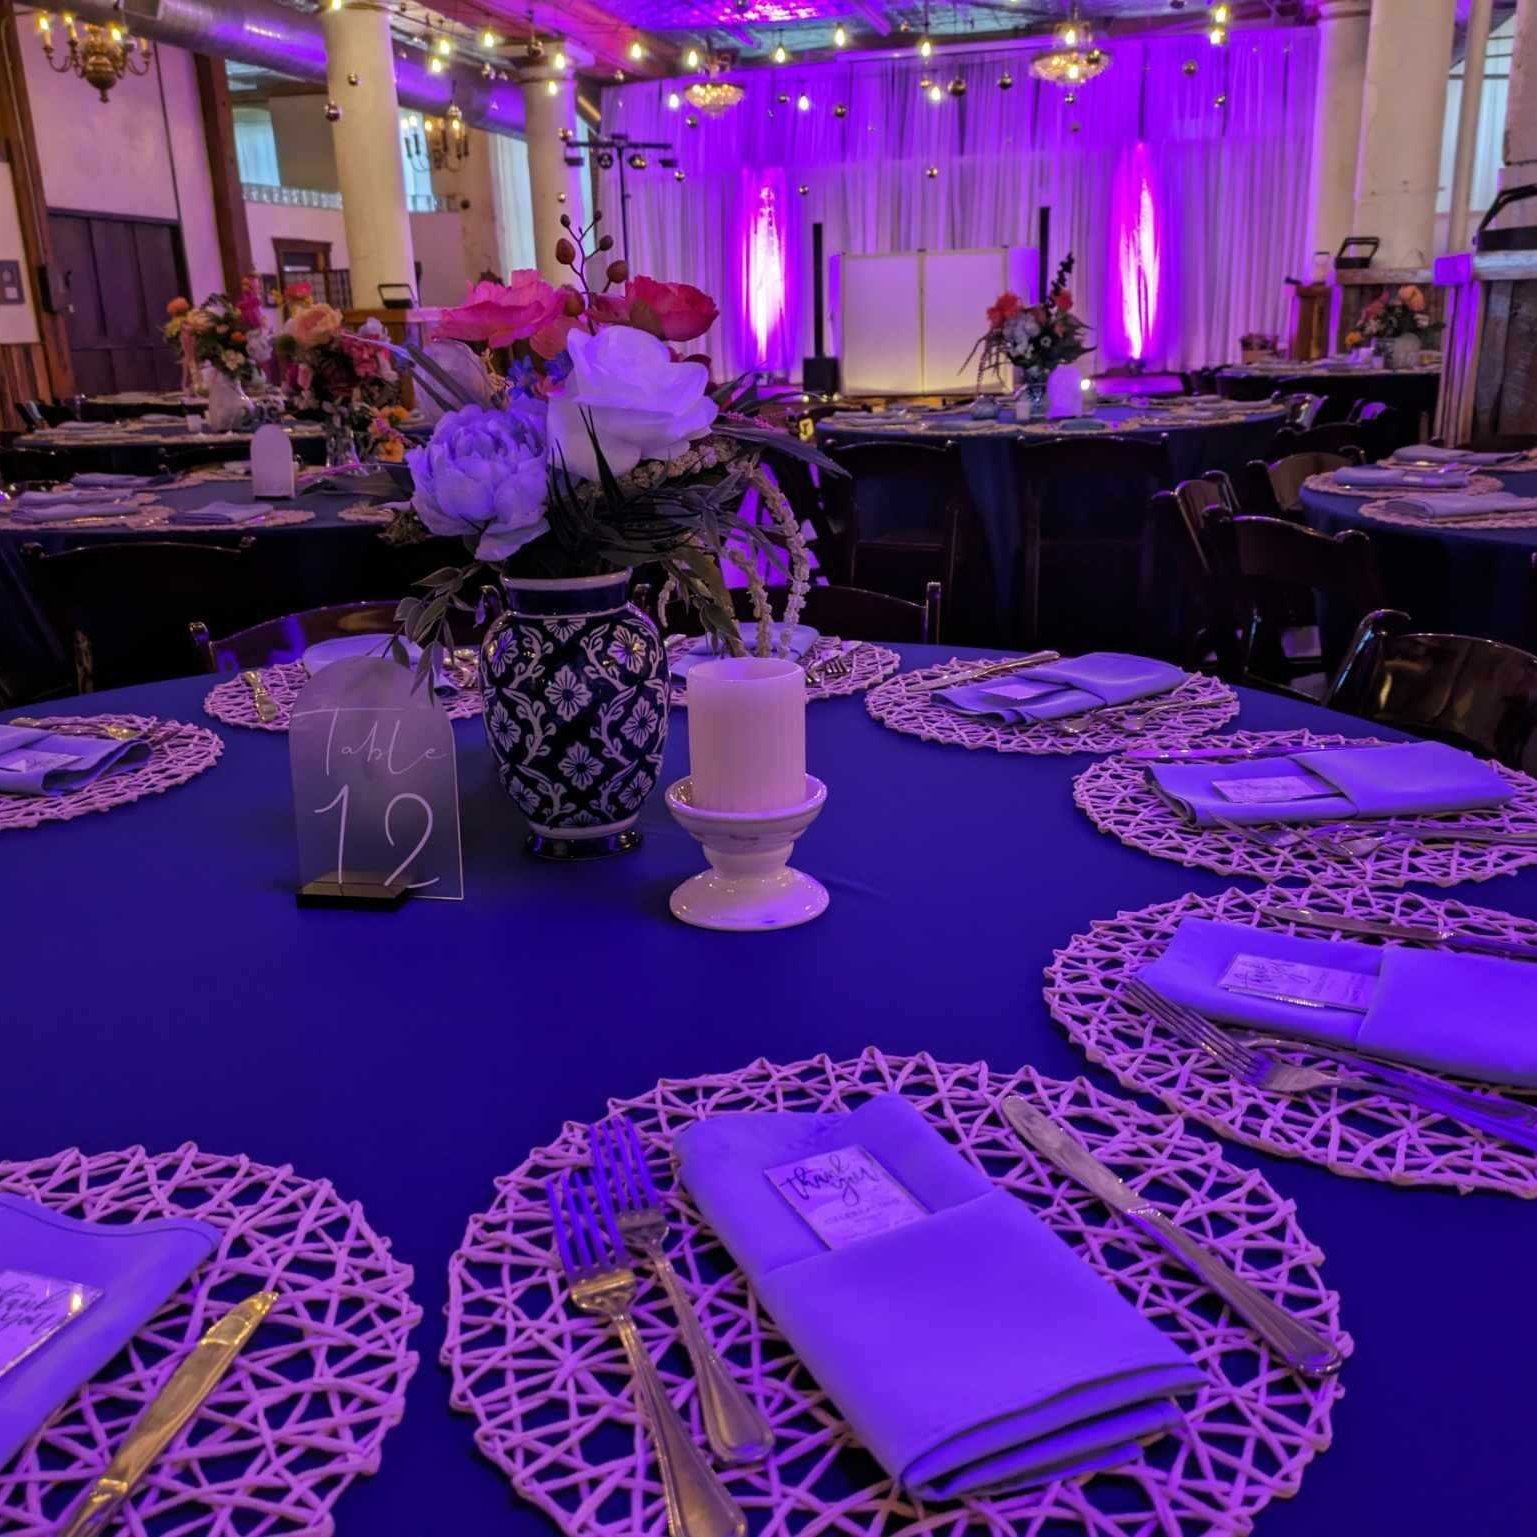 🎉 Last weekend, Plaza Catering had the pleasure of catering another magical wedding at The Rumely in Kansas City! Congratulations to the happy couple! 🥂 Thank you to all the guests who indulged in our culinary delights. Shoutout to the Rumely Tract